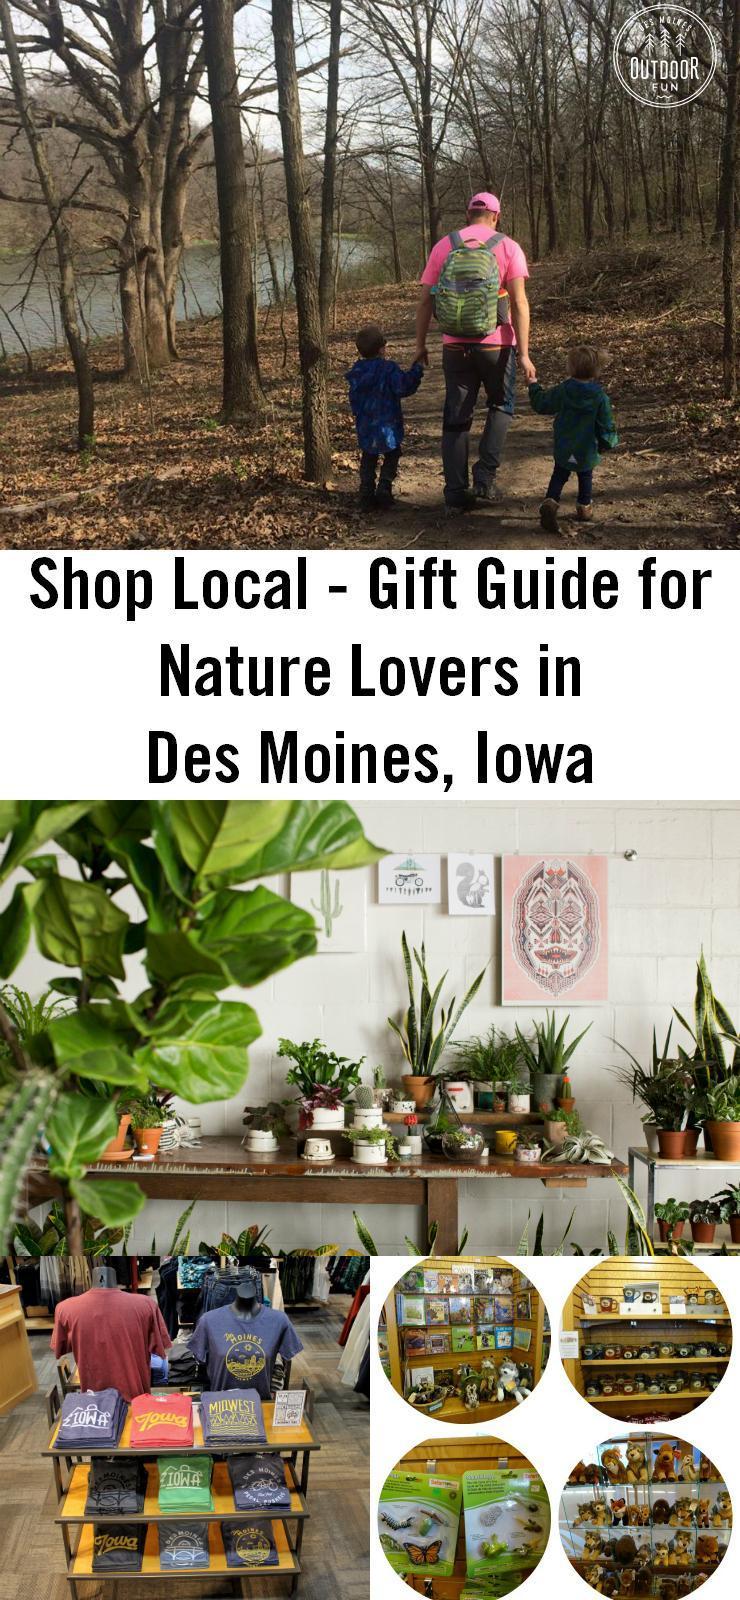 A local gift guide in Des Moines, Iowa for nature lovers!